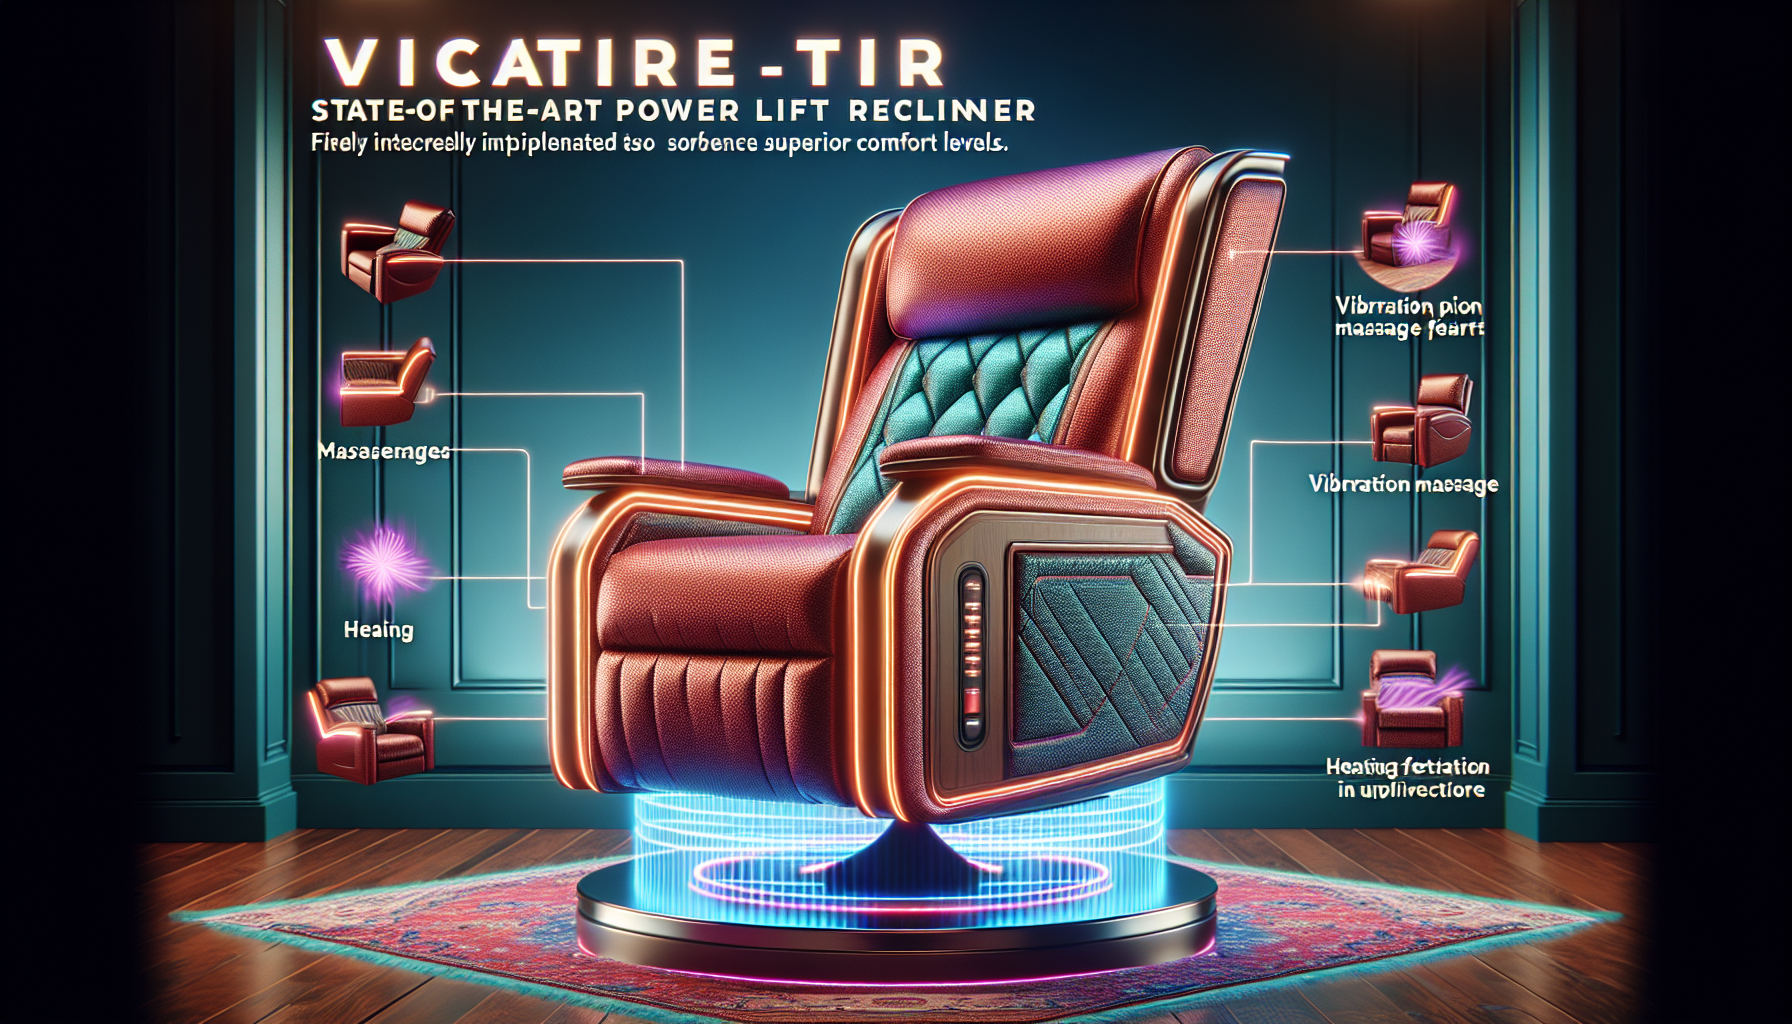 Experience Ultimate Comfort: The Luxury Power Lift Recliner with Vibration Massage and Heating Features